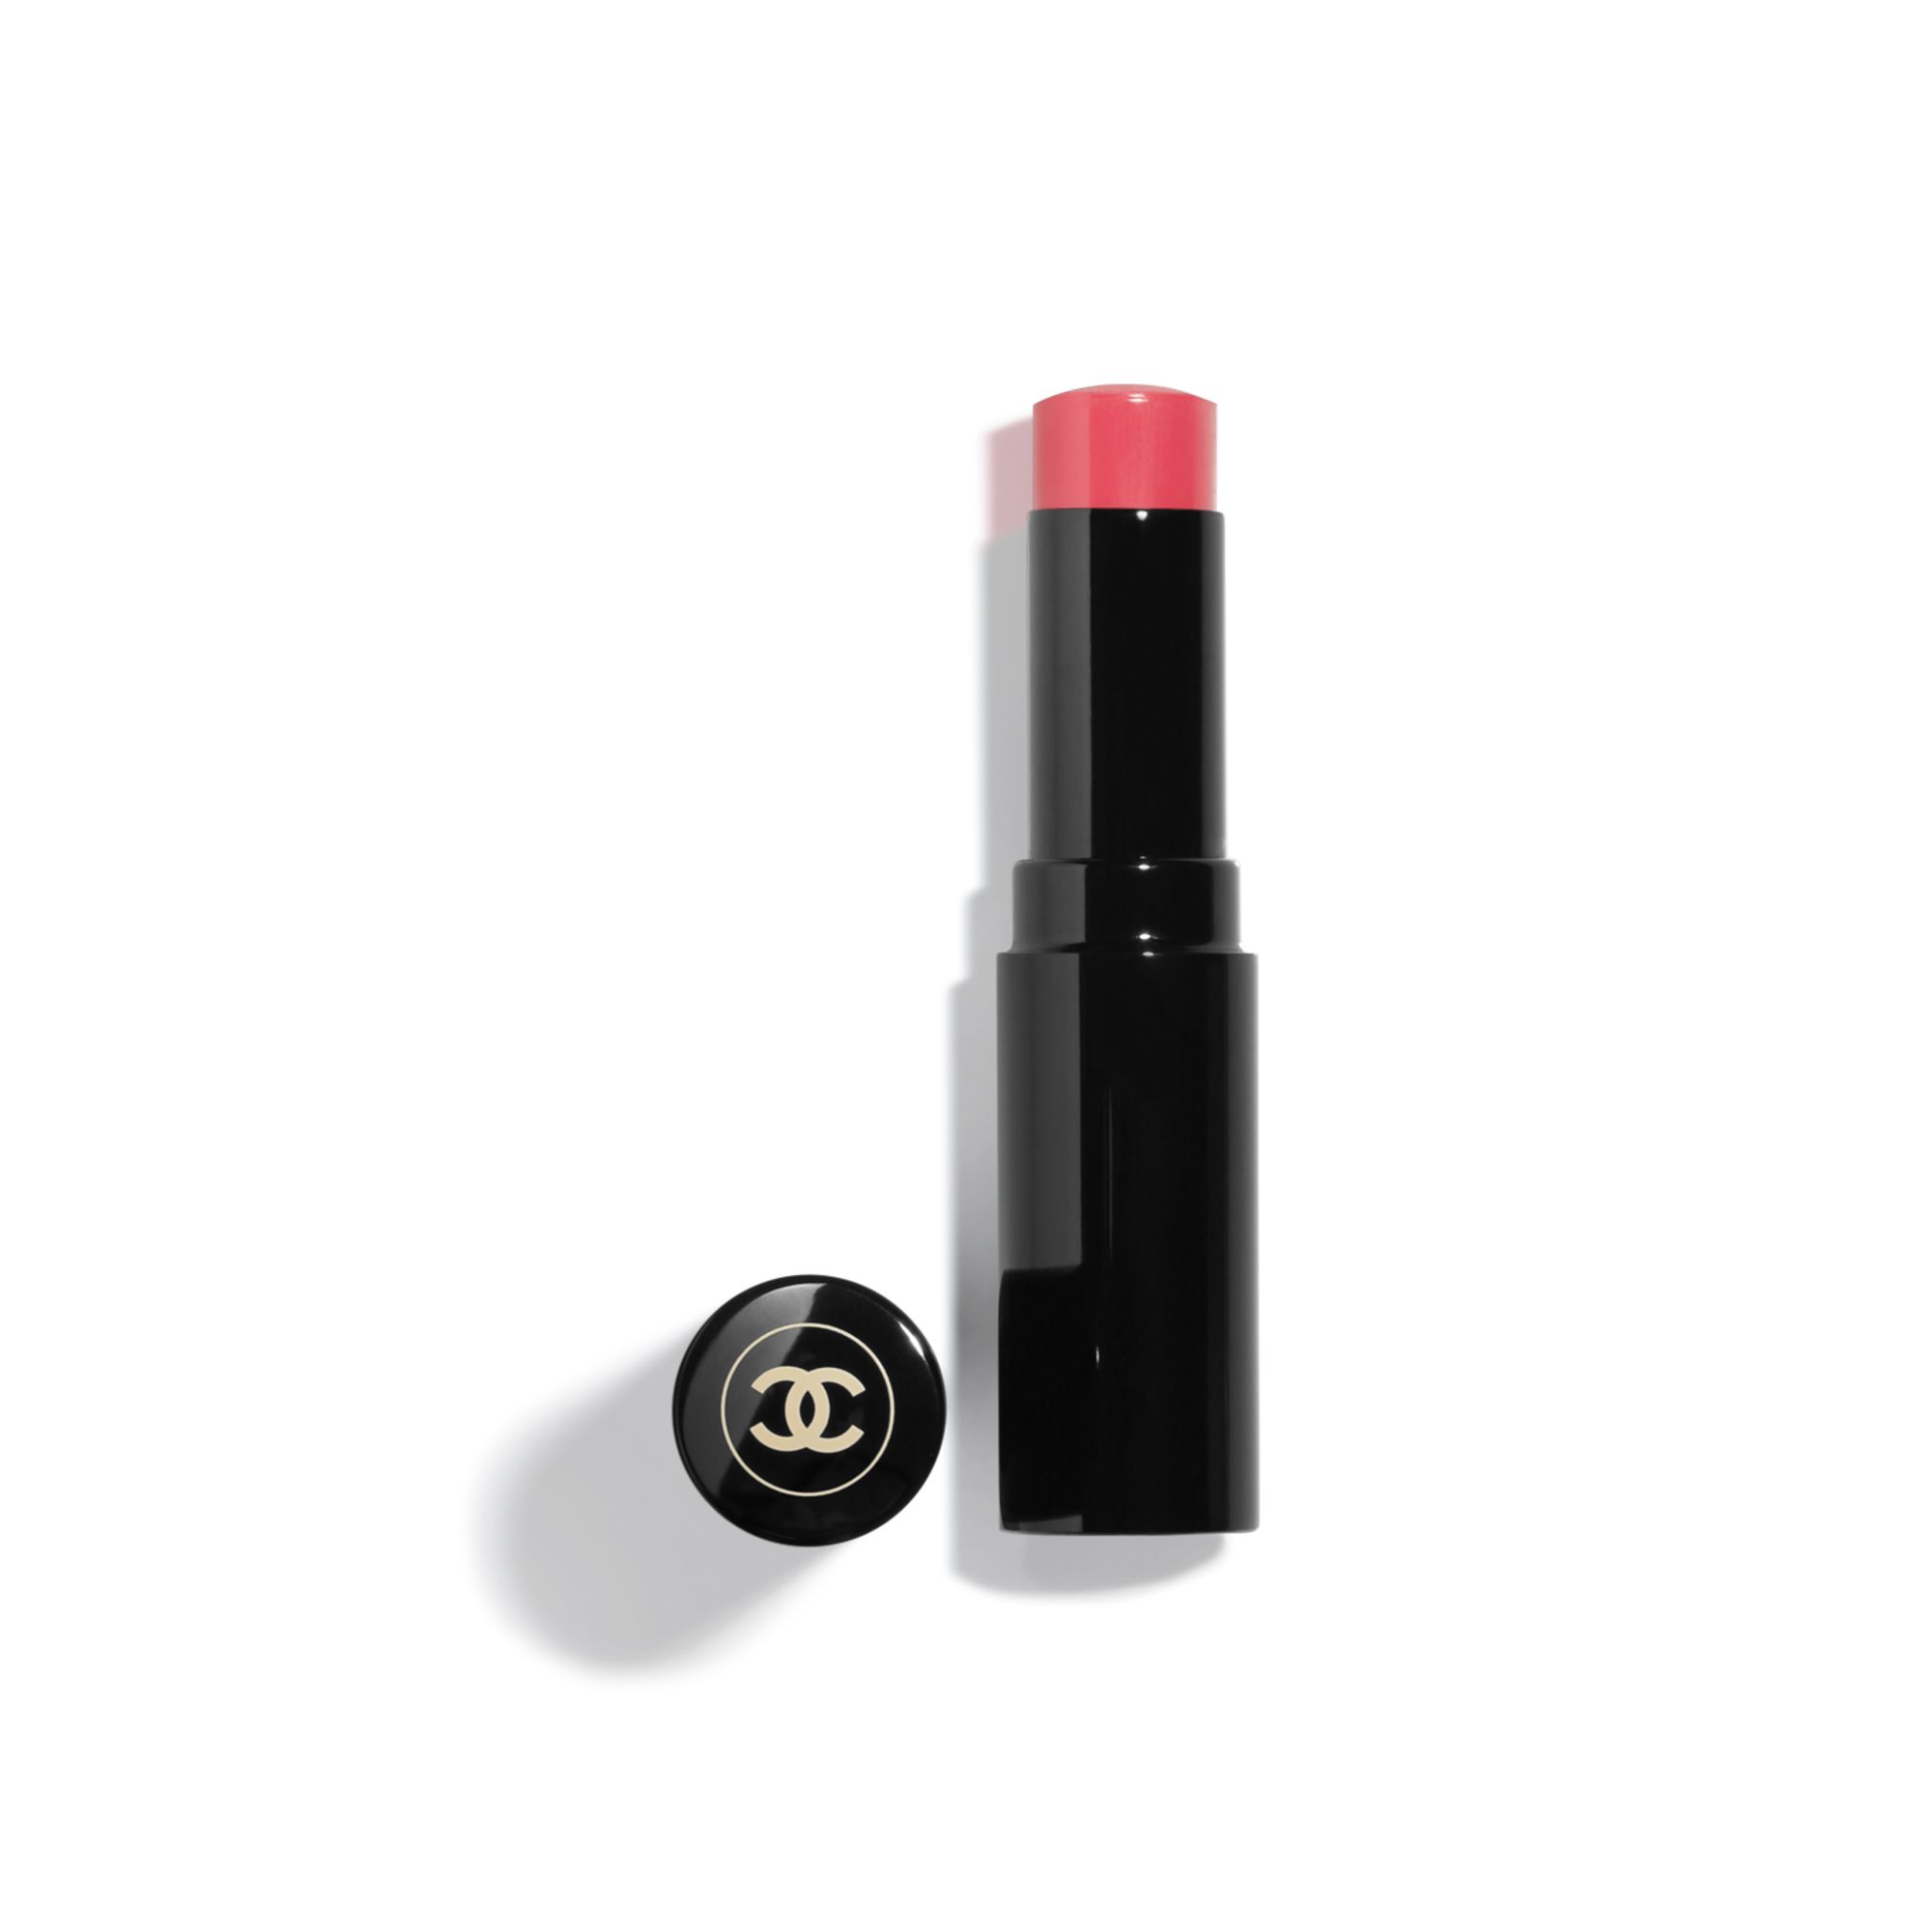 Chanel Rouge Coco Flash Hydrating Vibrant Shine Lip Colour - # 78 Emotion  3g